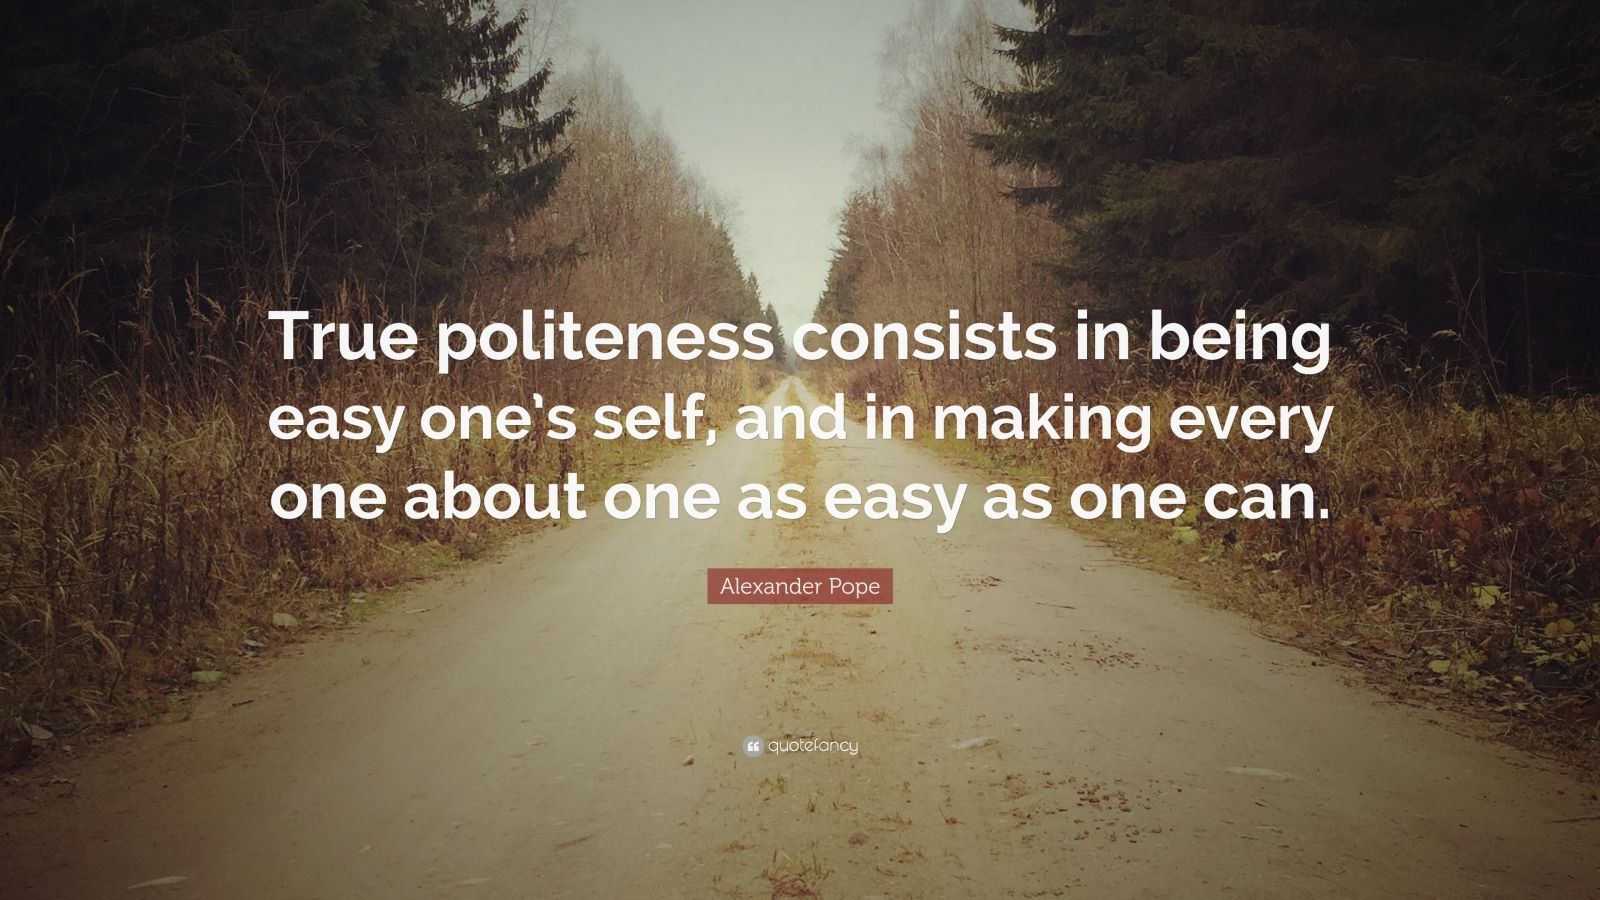 Alexander Pope Quote: “True politeness consists in being easy one’s ...